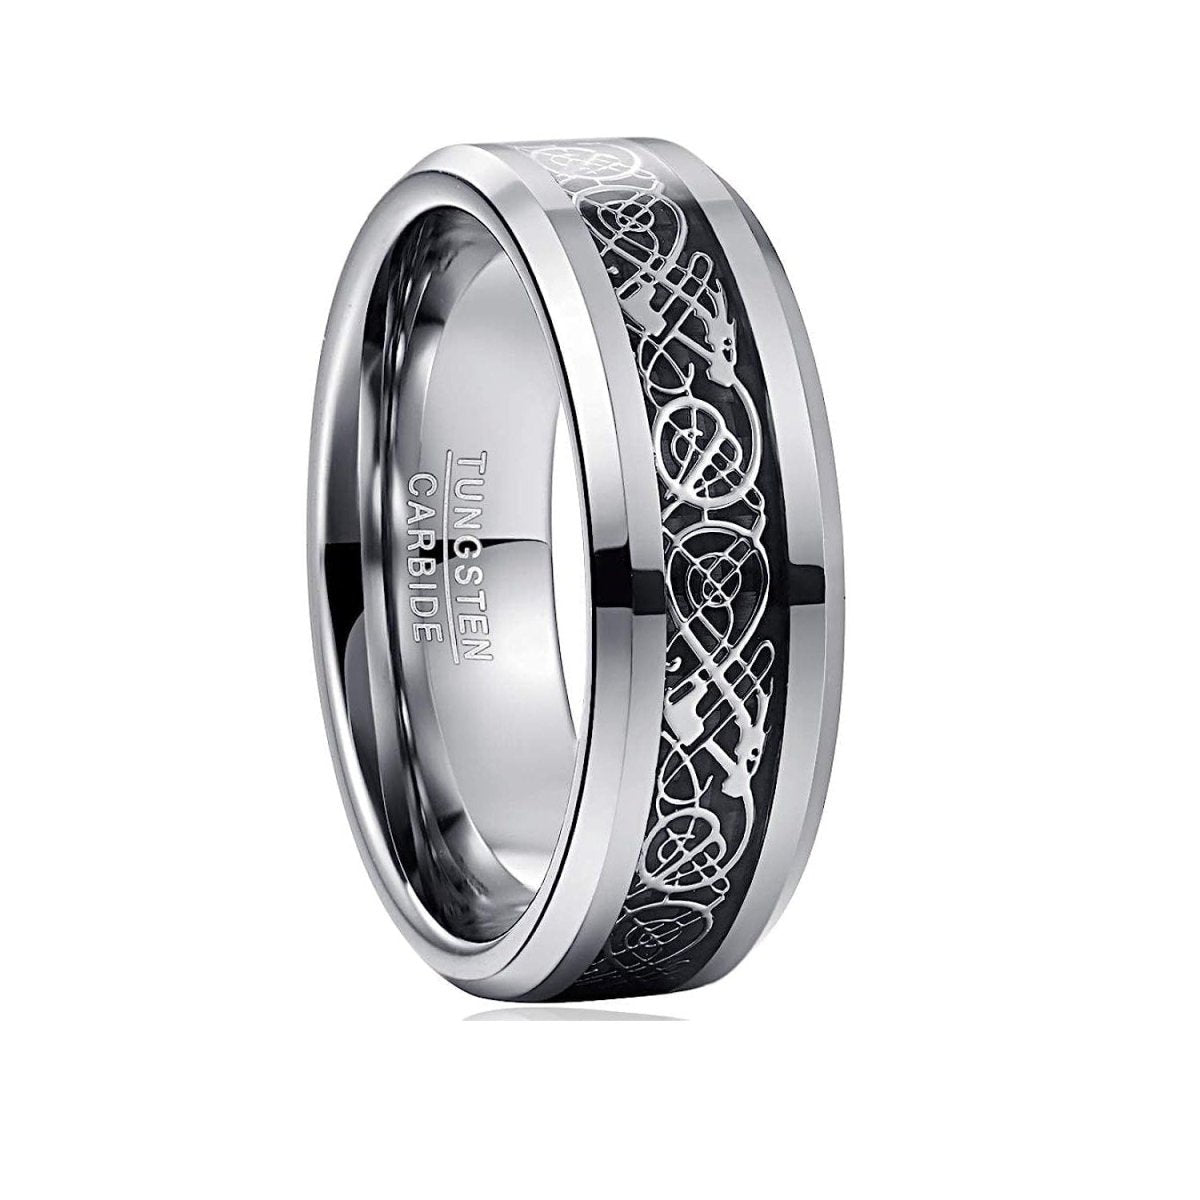 Silver Celtic - Silver Tungsten Ring with Celtic Pattern